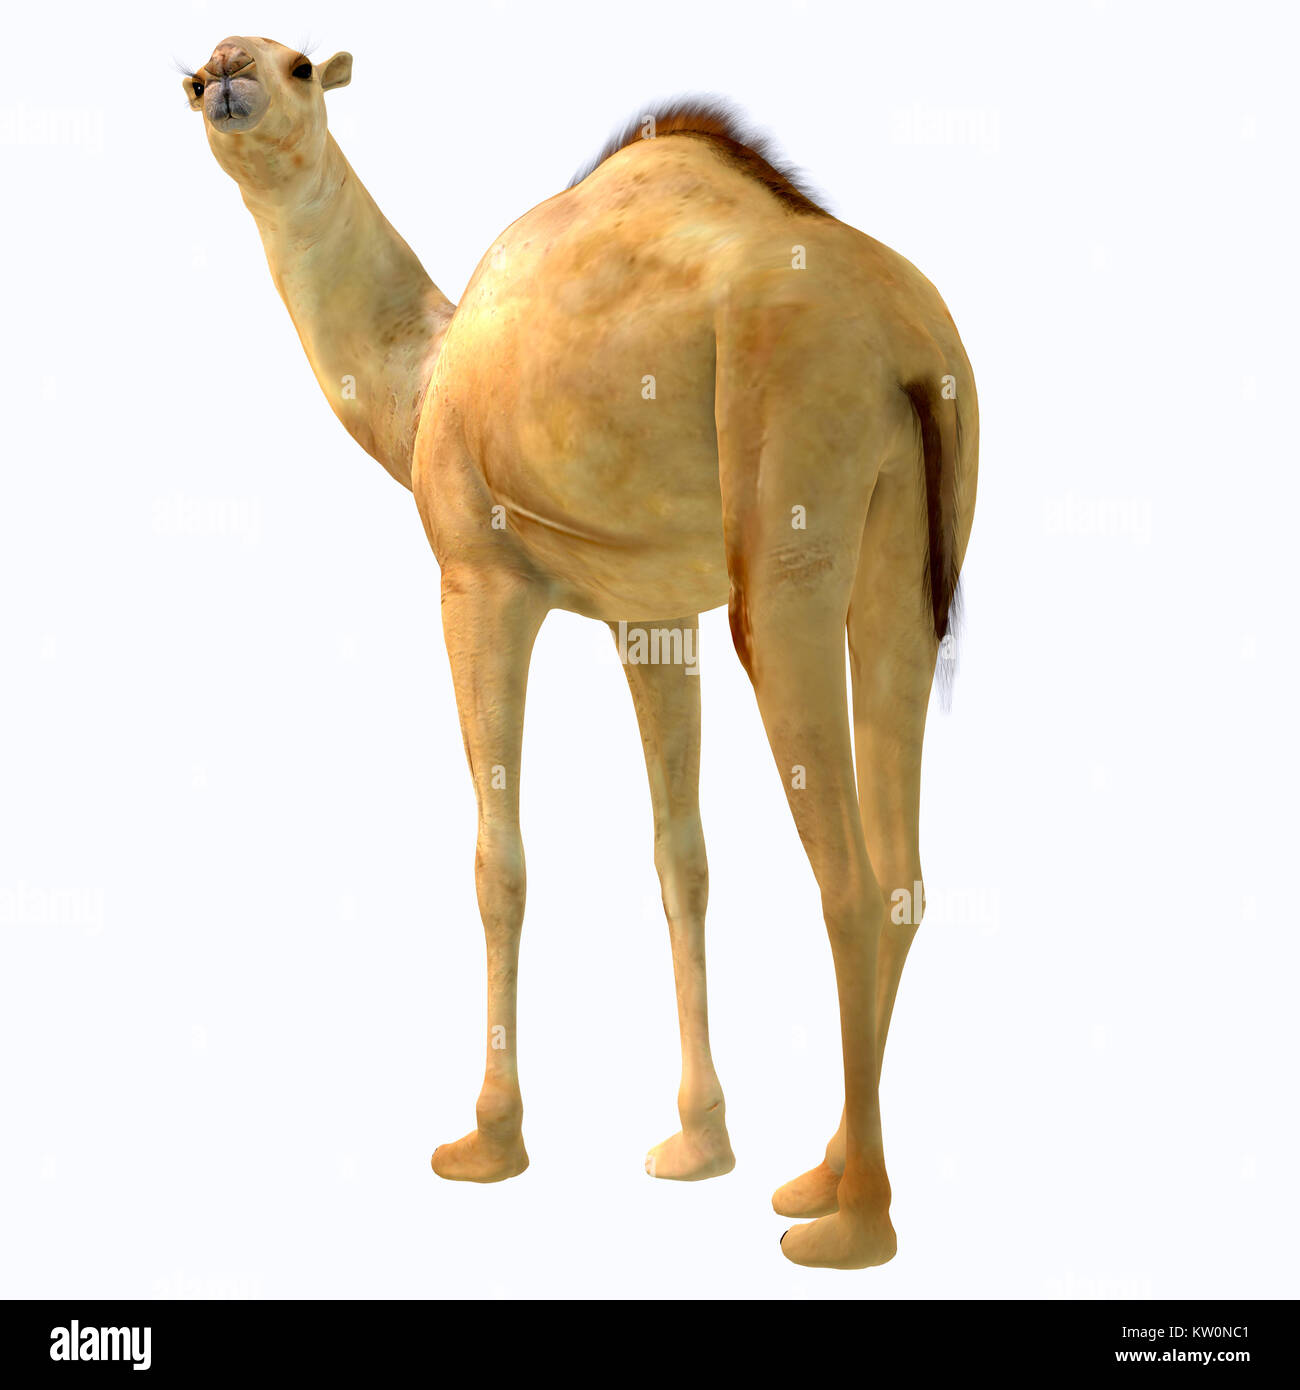 Camelops hesternus Tail - Camelops was a camel-type herbivorous animal that lived in North America during the Pleistocene Period. Stock Photo